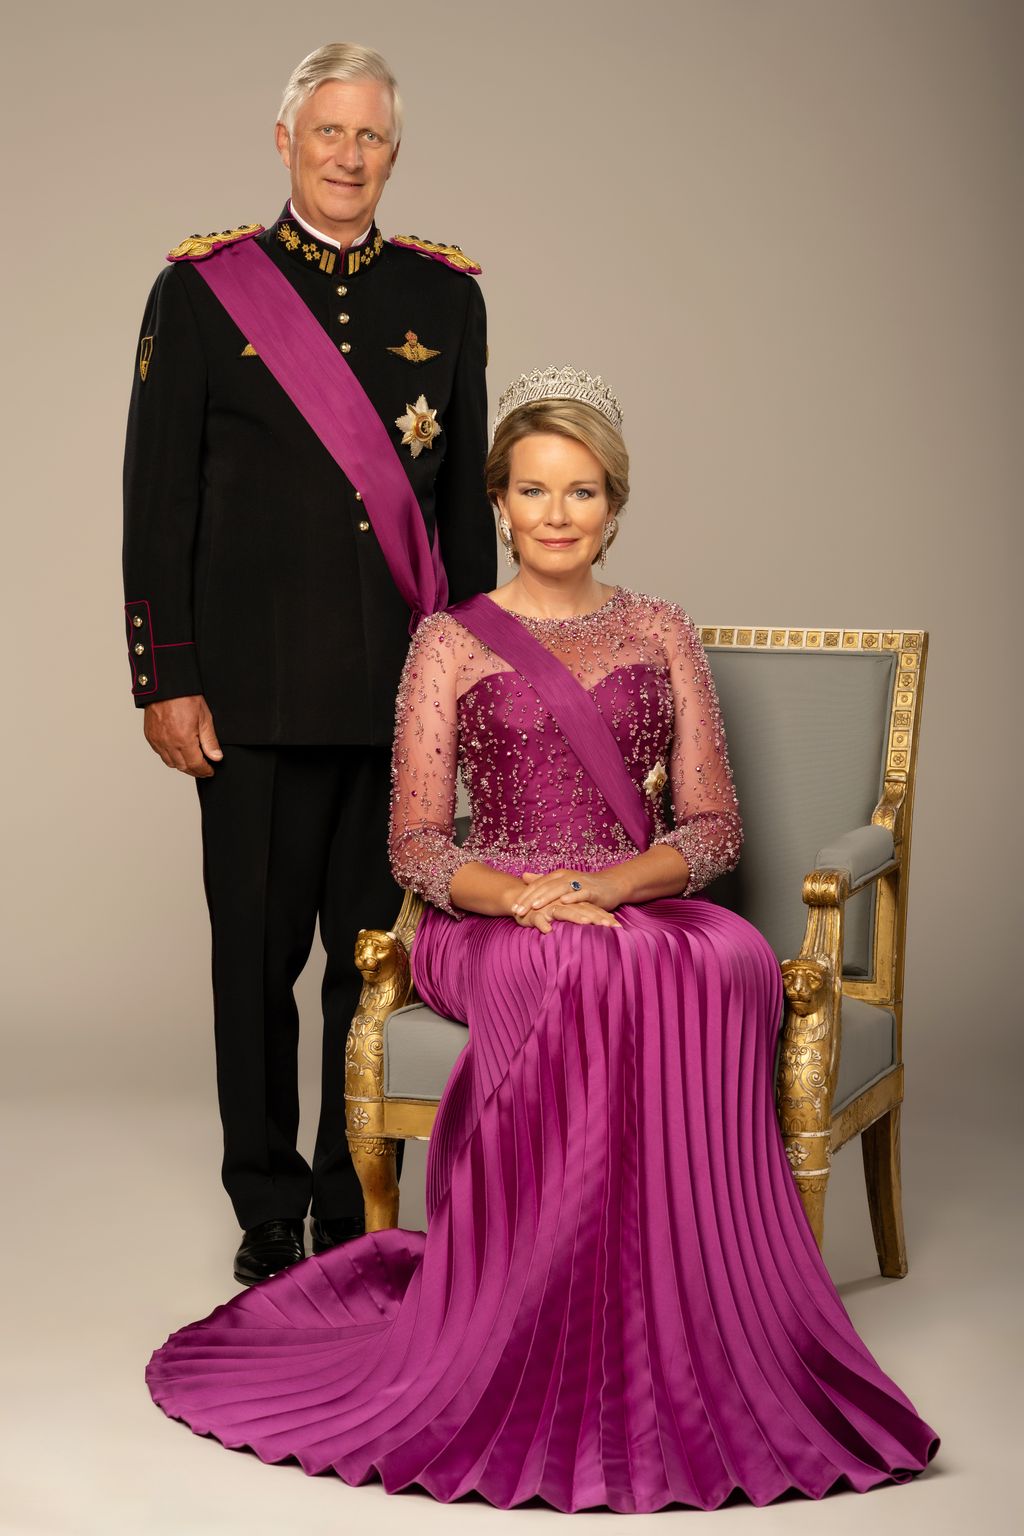 King Philippe and Queen Mathilde seated for portrait